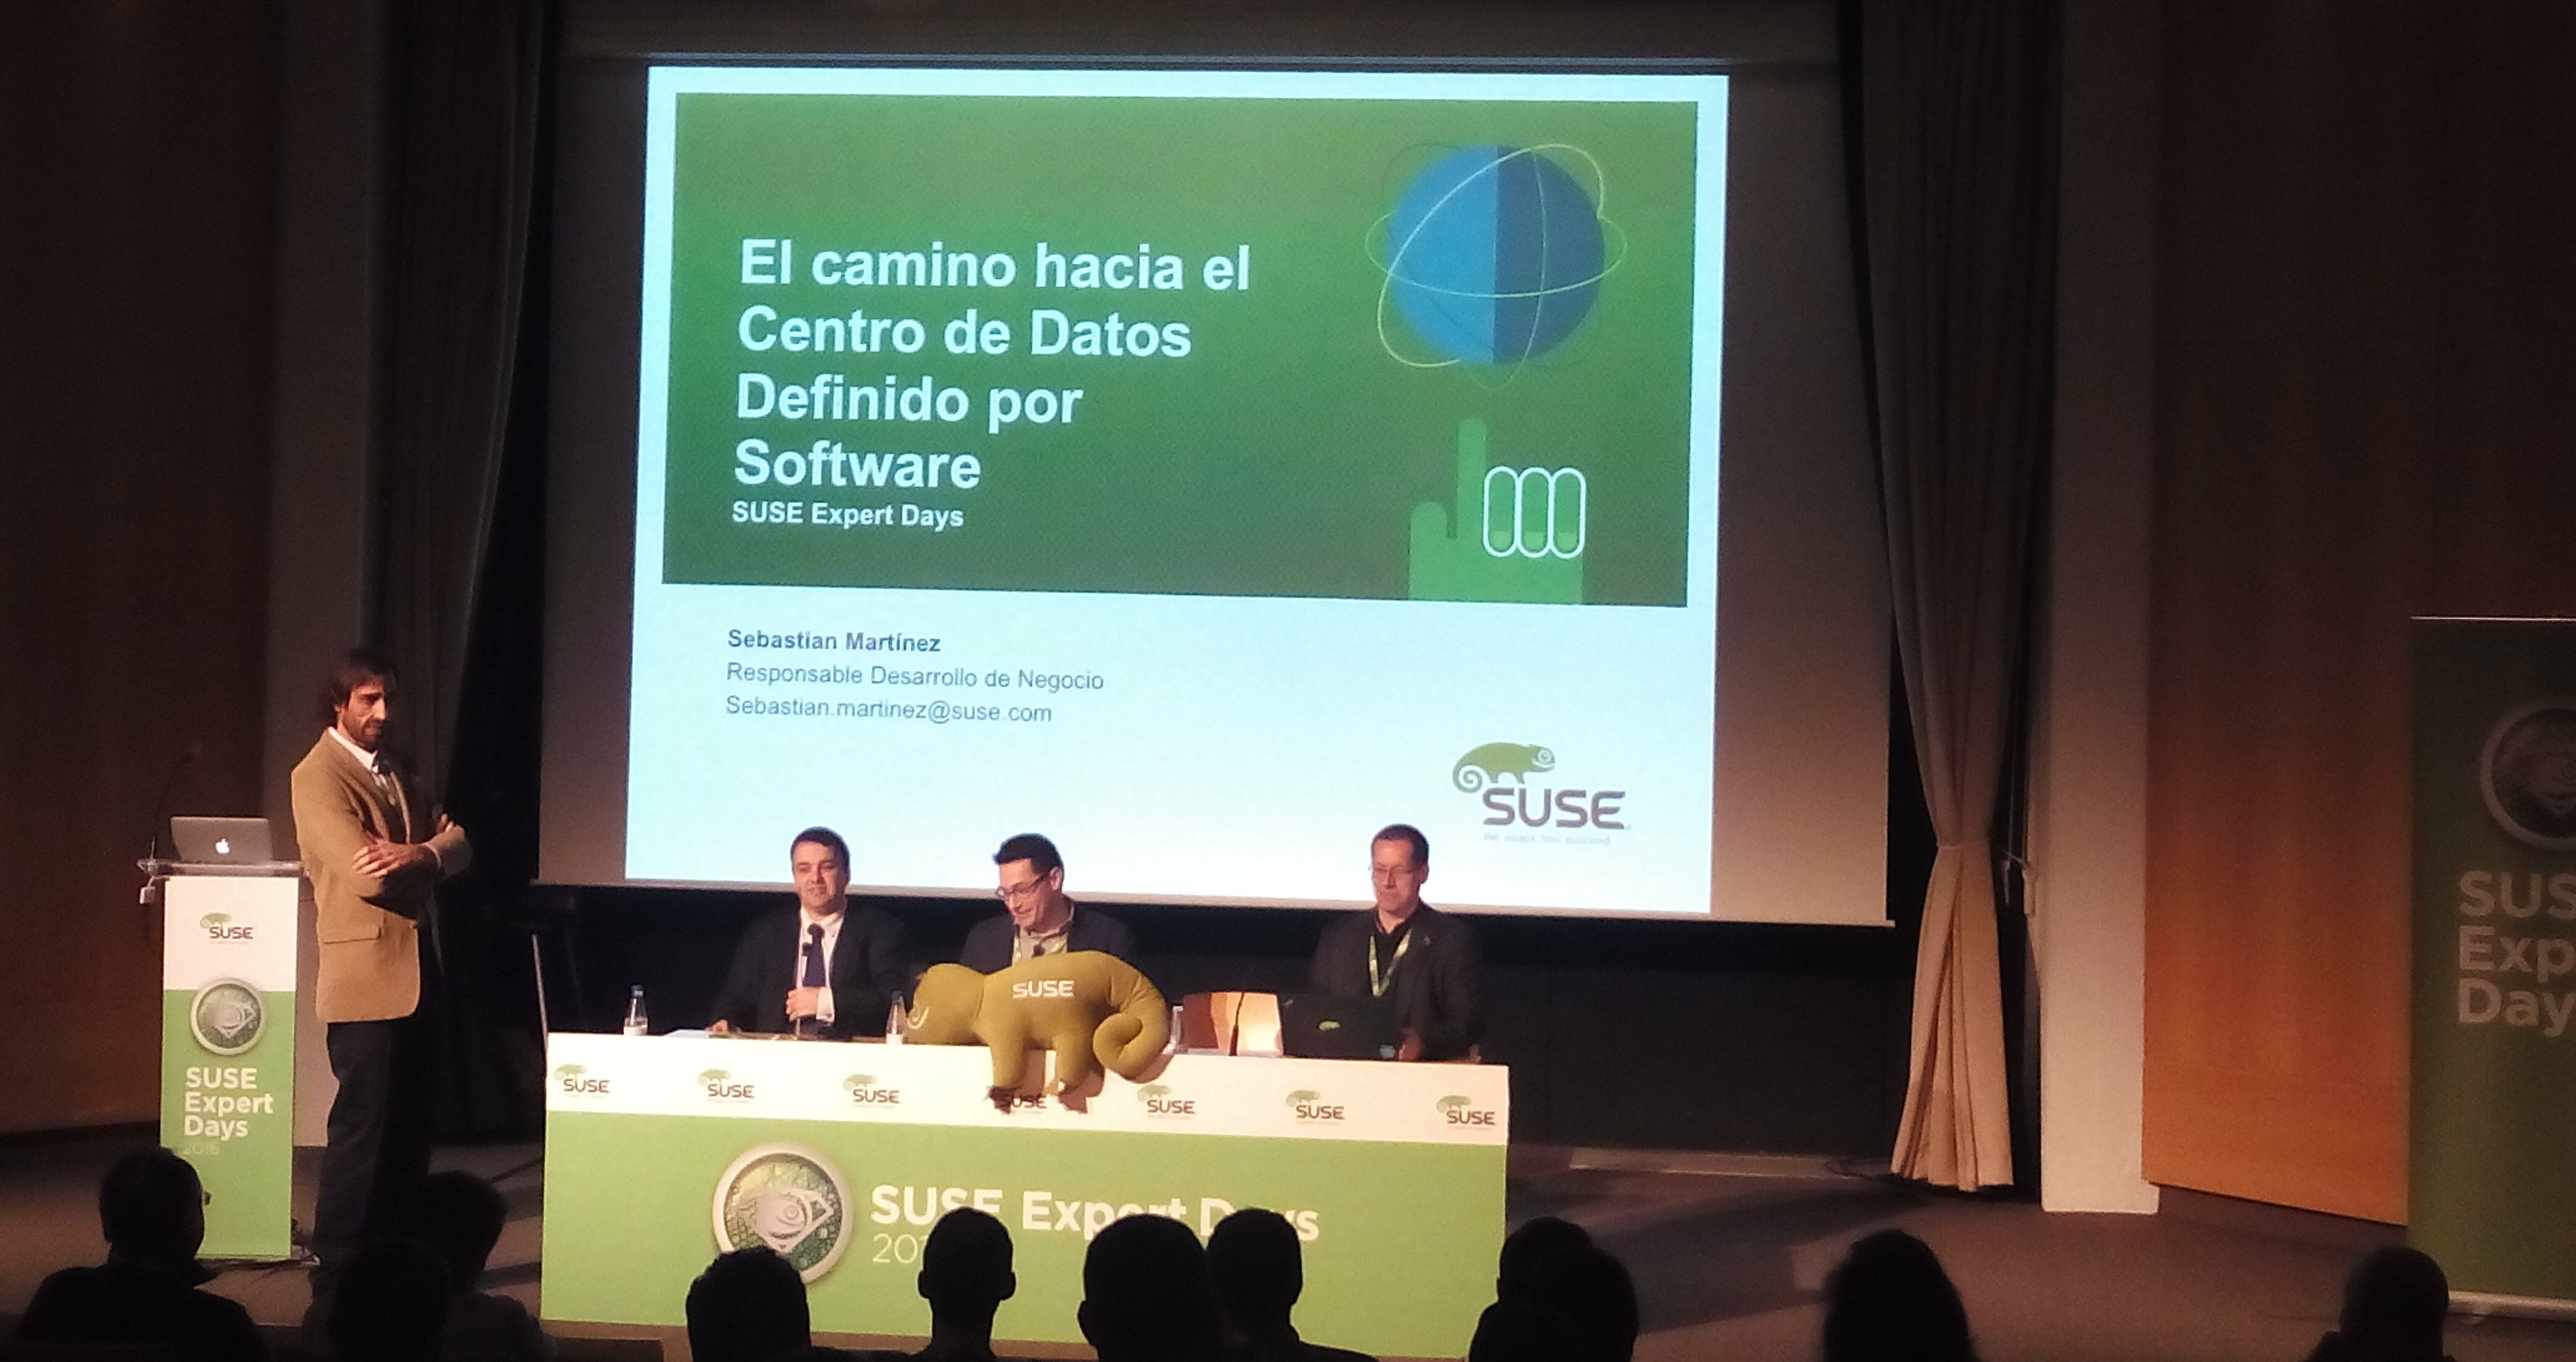 SUSE expert